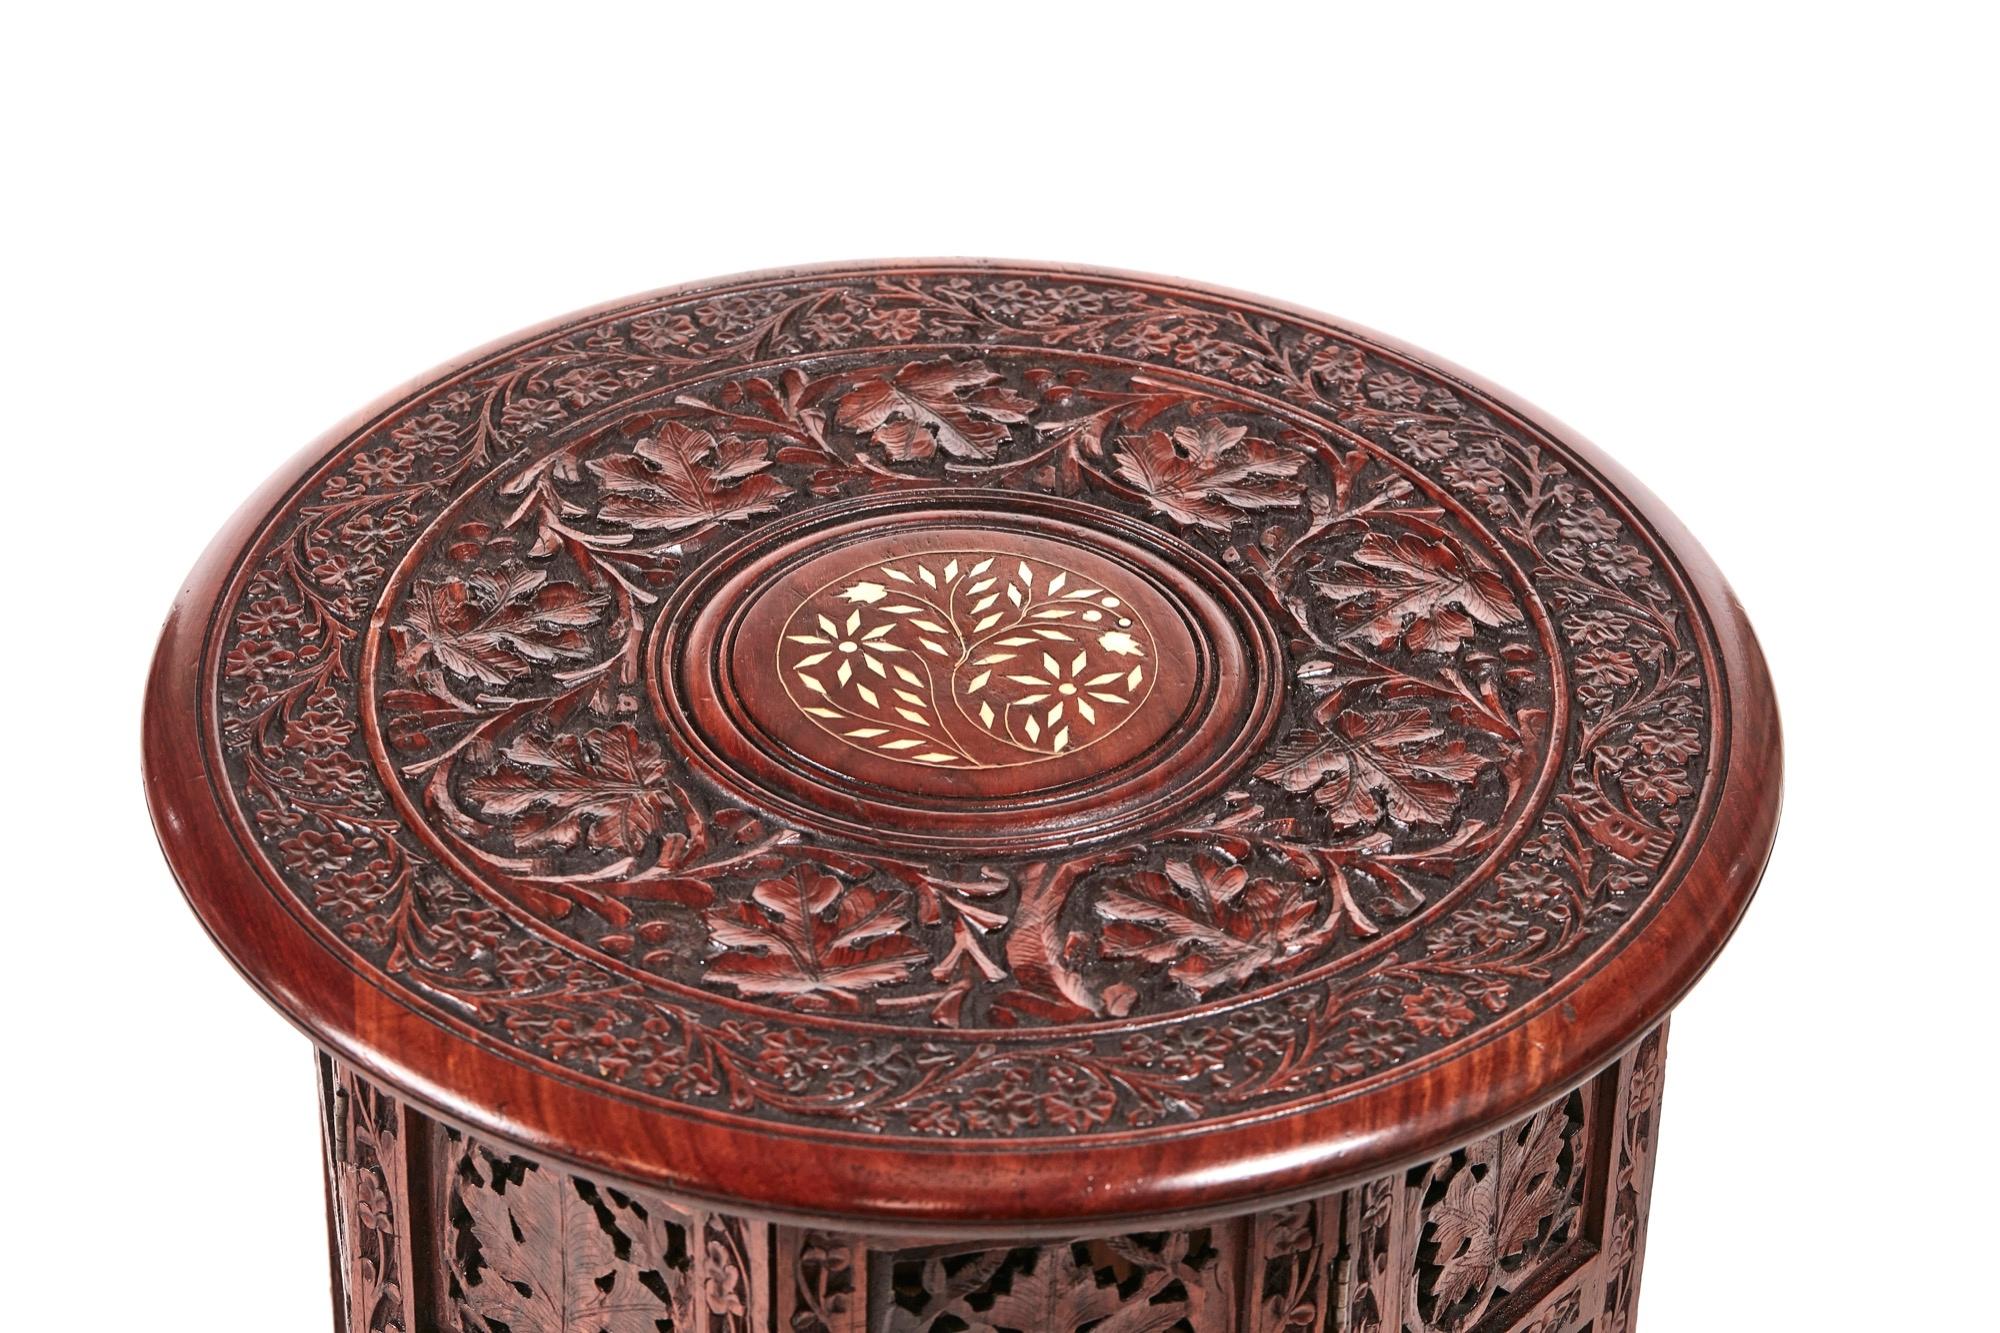 Quality antique Victorian carved round centre table having a fantastic quality carved round top with an inlaid central panel. It stands on a quality carved folding hexagonal base.

An expertly carved piece in splendid condition.

Measures: Height 48